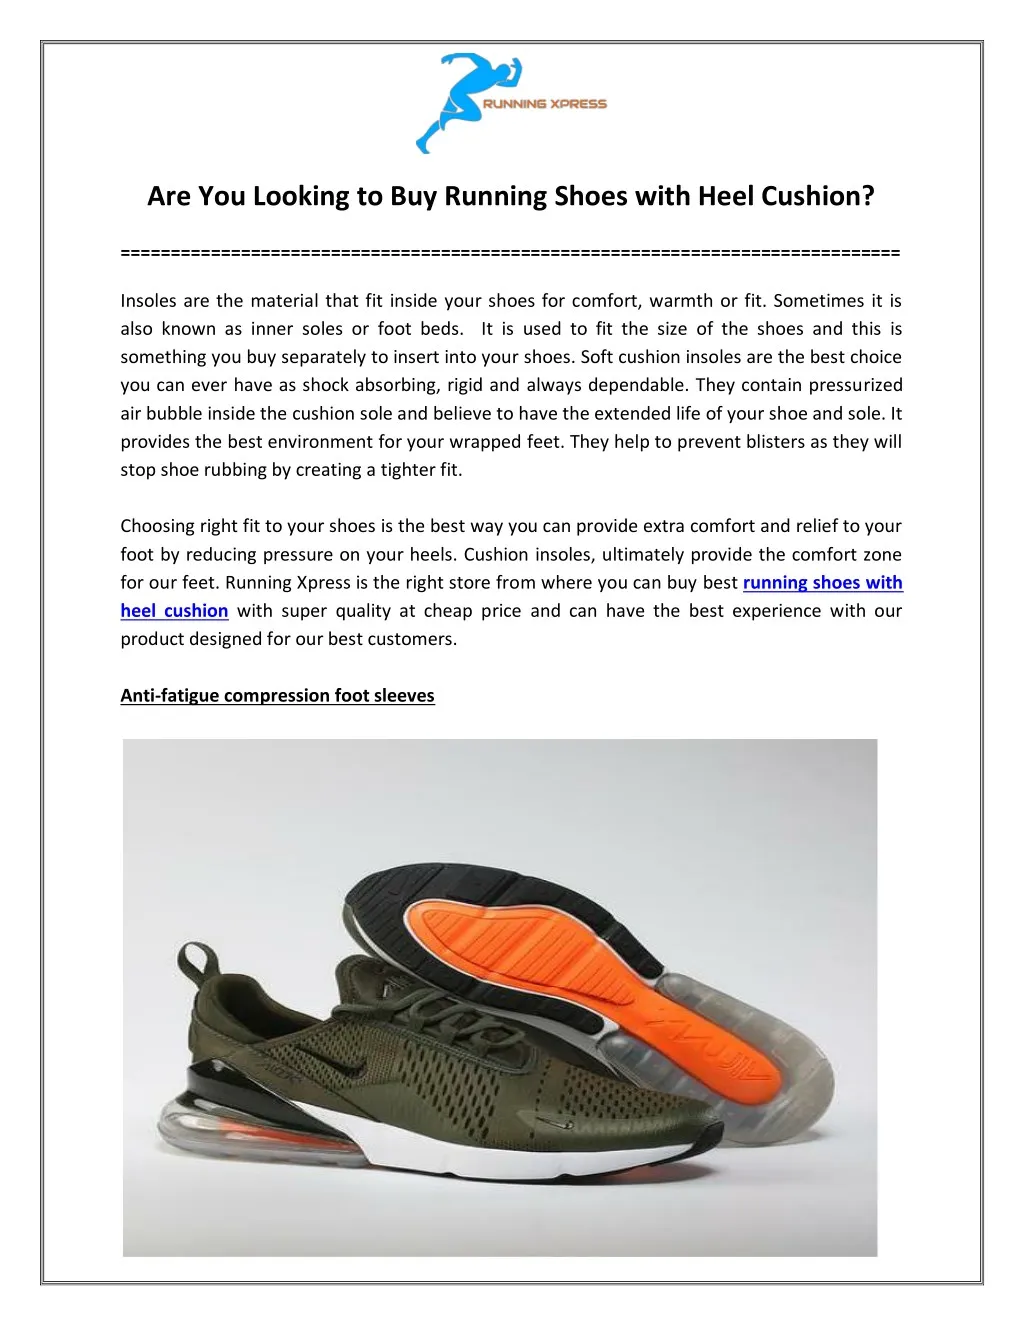 are you looking to buy running shoes with heel